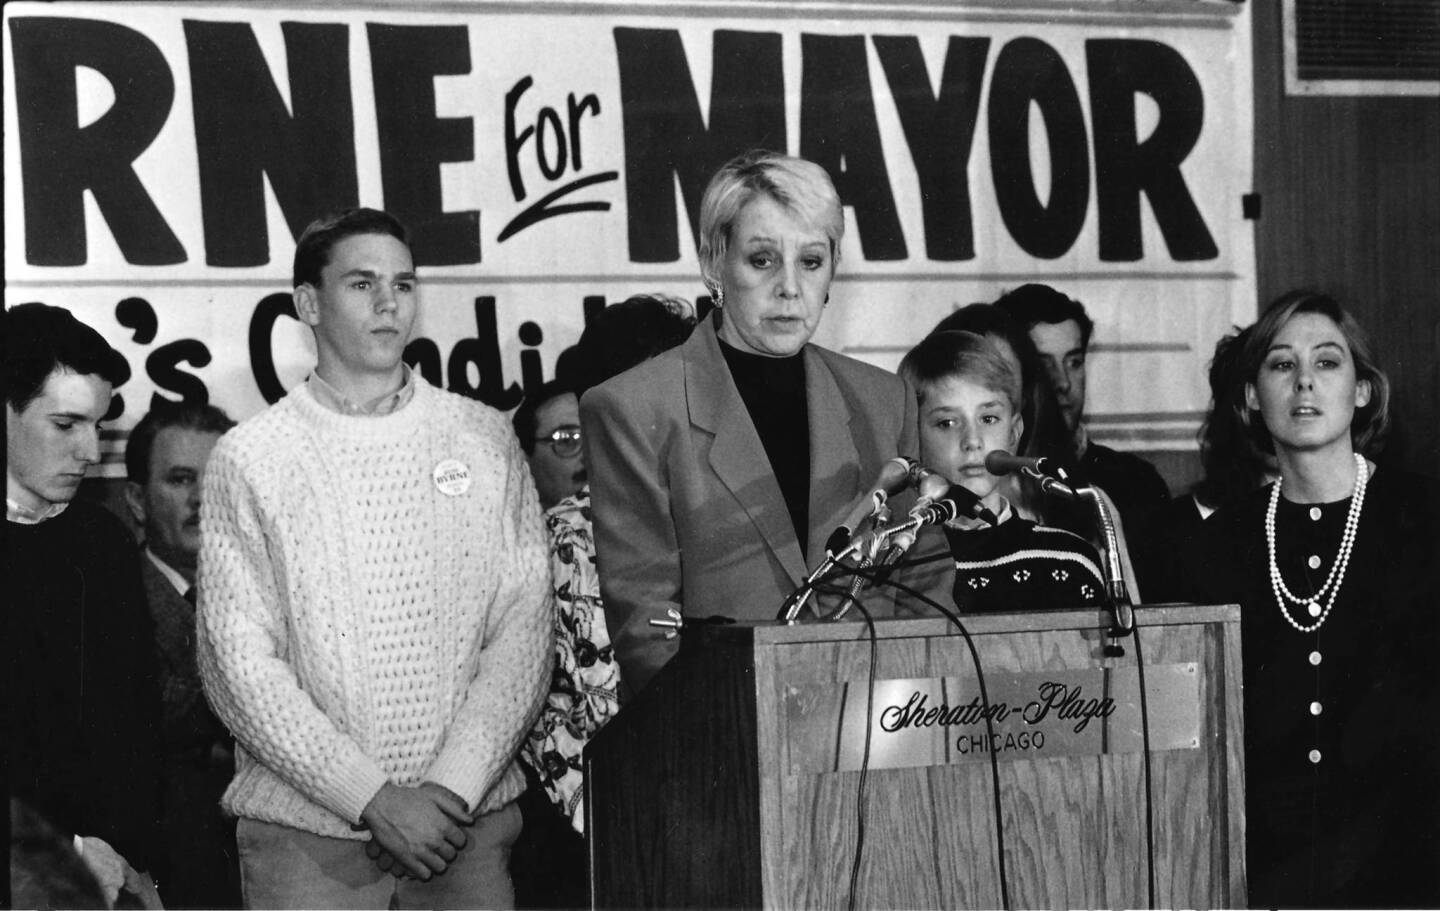 Chicago's first and only female mayor, Jane Byrne, died Nov. 14, 2014 at the age of 81.